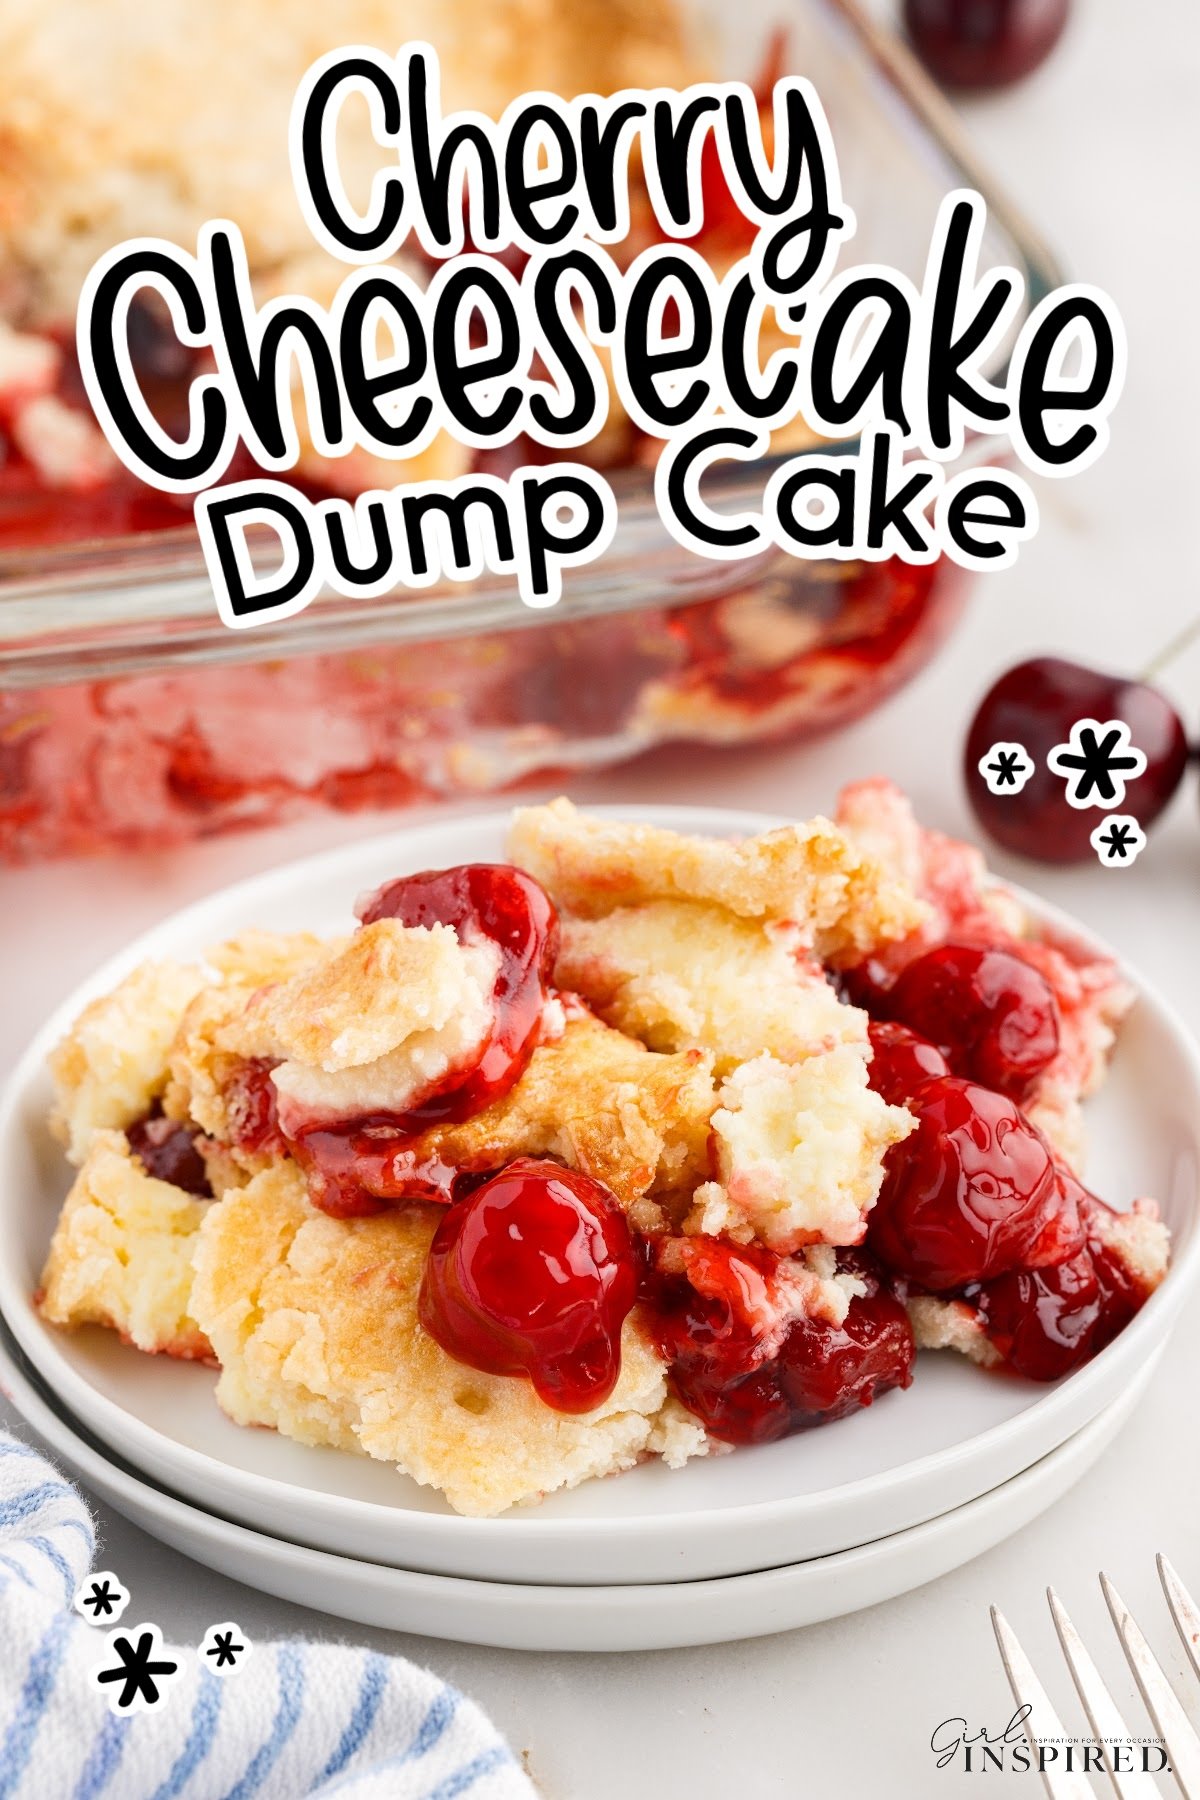 A plate of a serving of Cherry Cheesecake Dump Cake with text overlay.